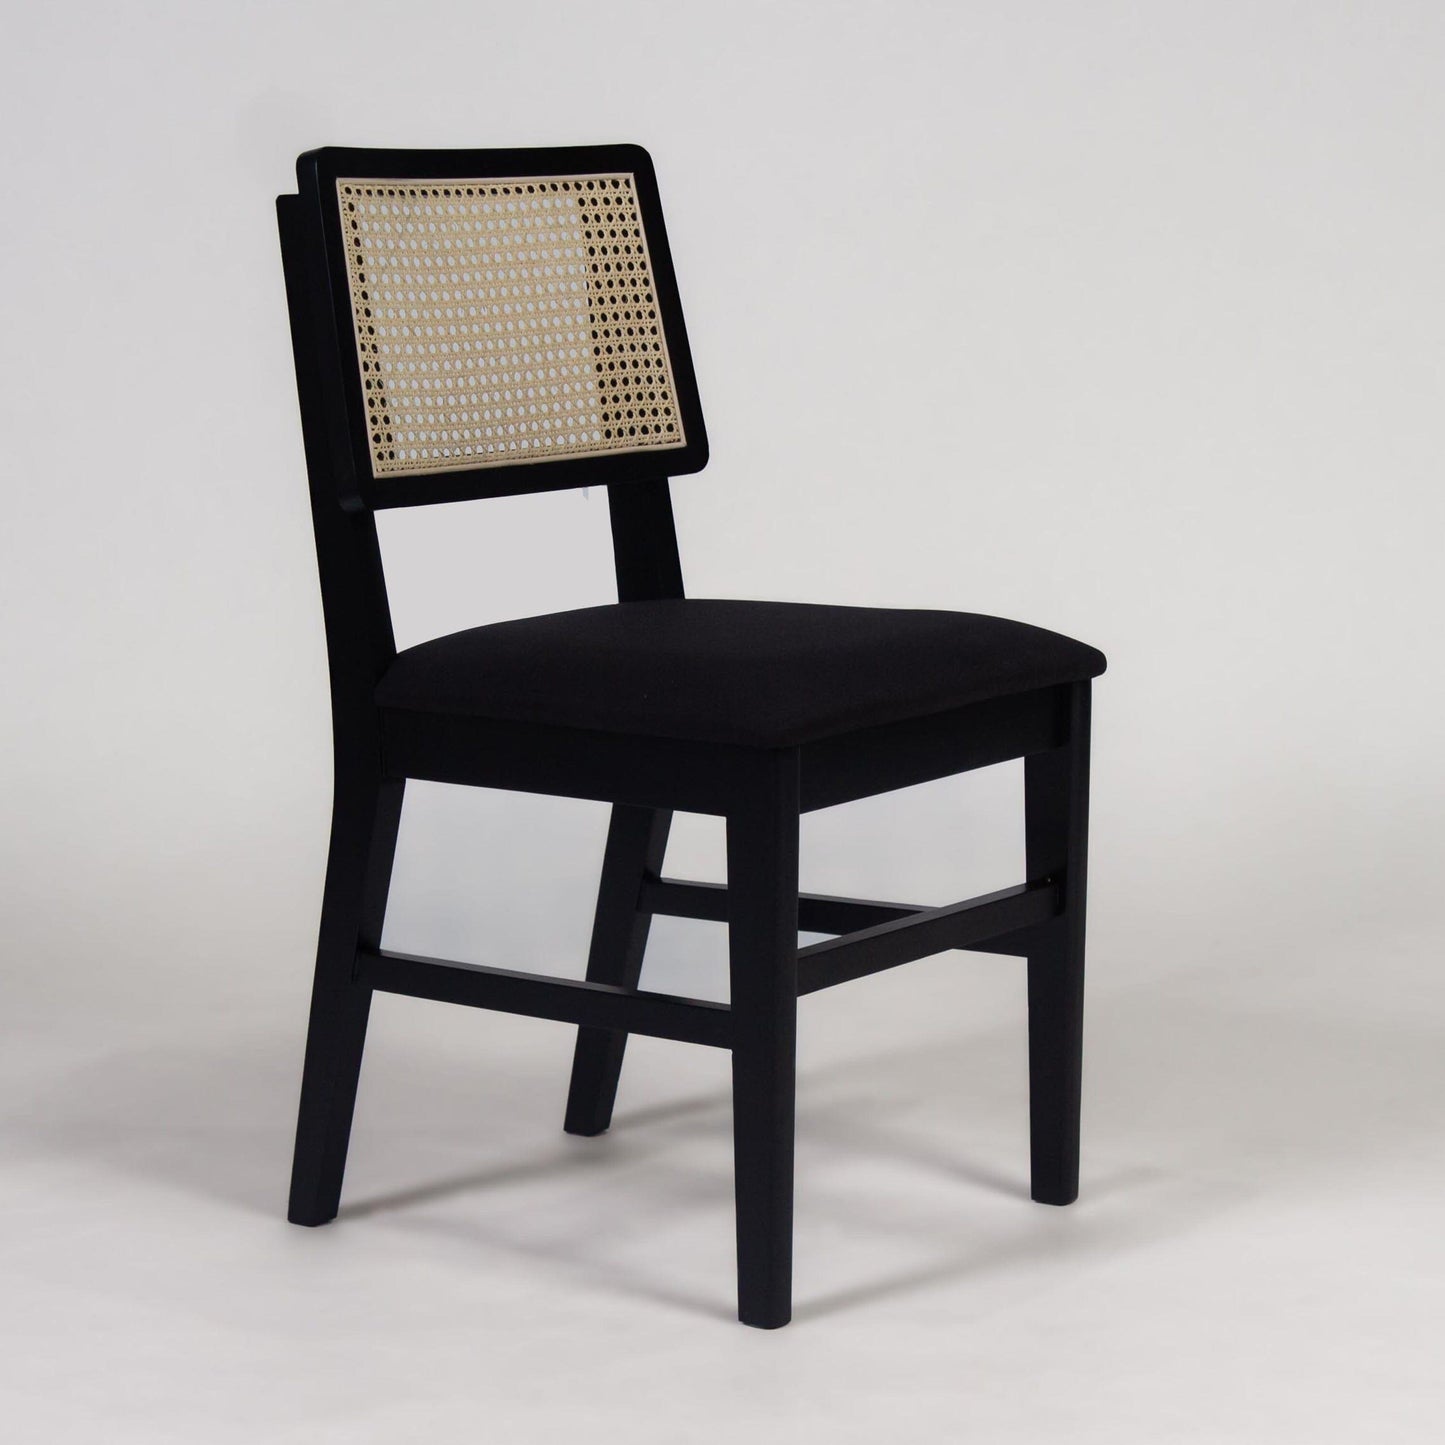 Charlie dining chair - set of 2 - black